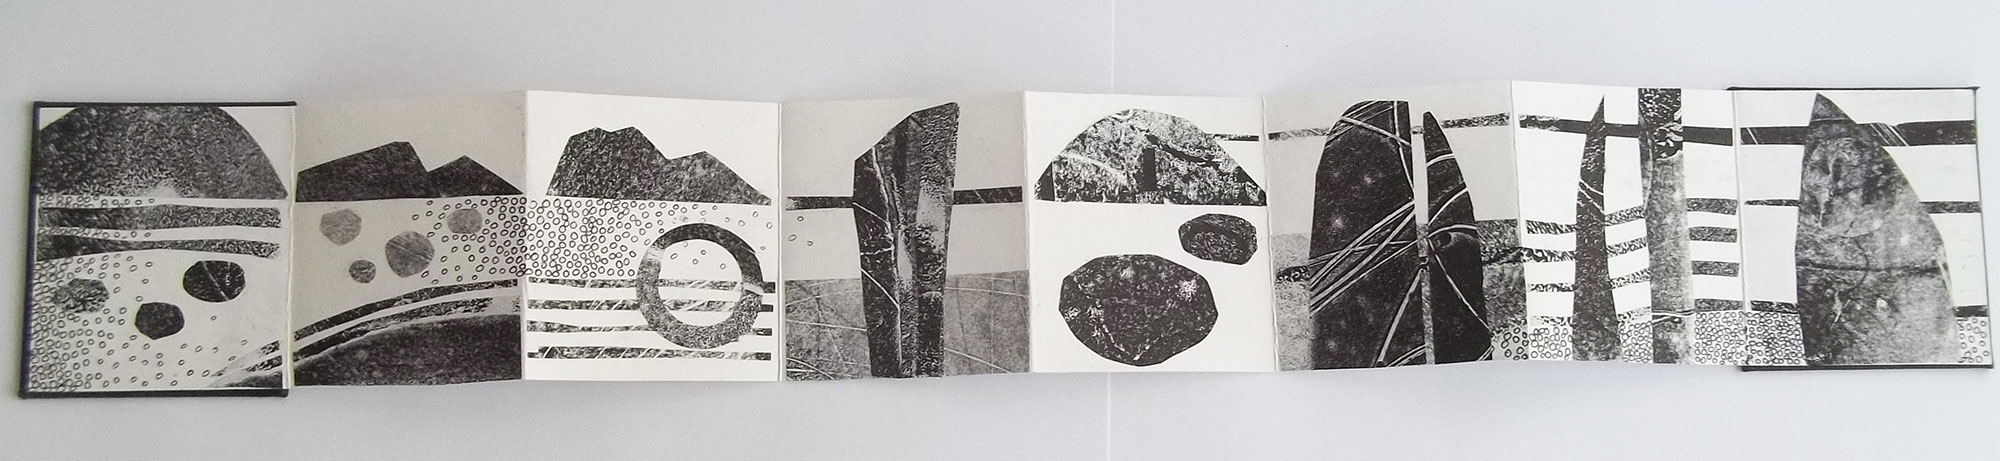 Stones and Chambers, Concertina Book, Monoprint, Collage, 8.5cm x 8.5cm closed, opens to 59cm x 7.5cm